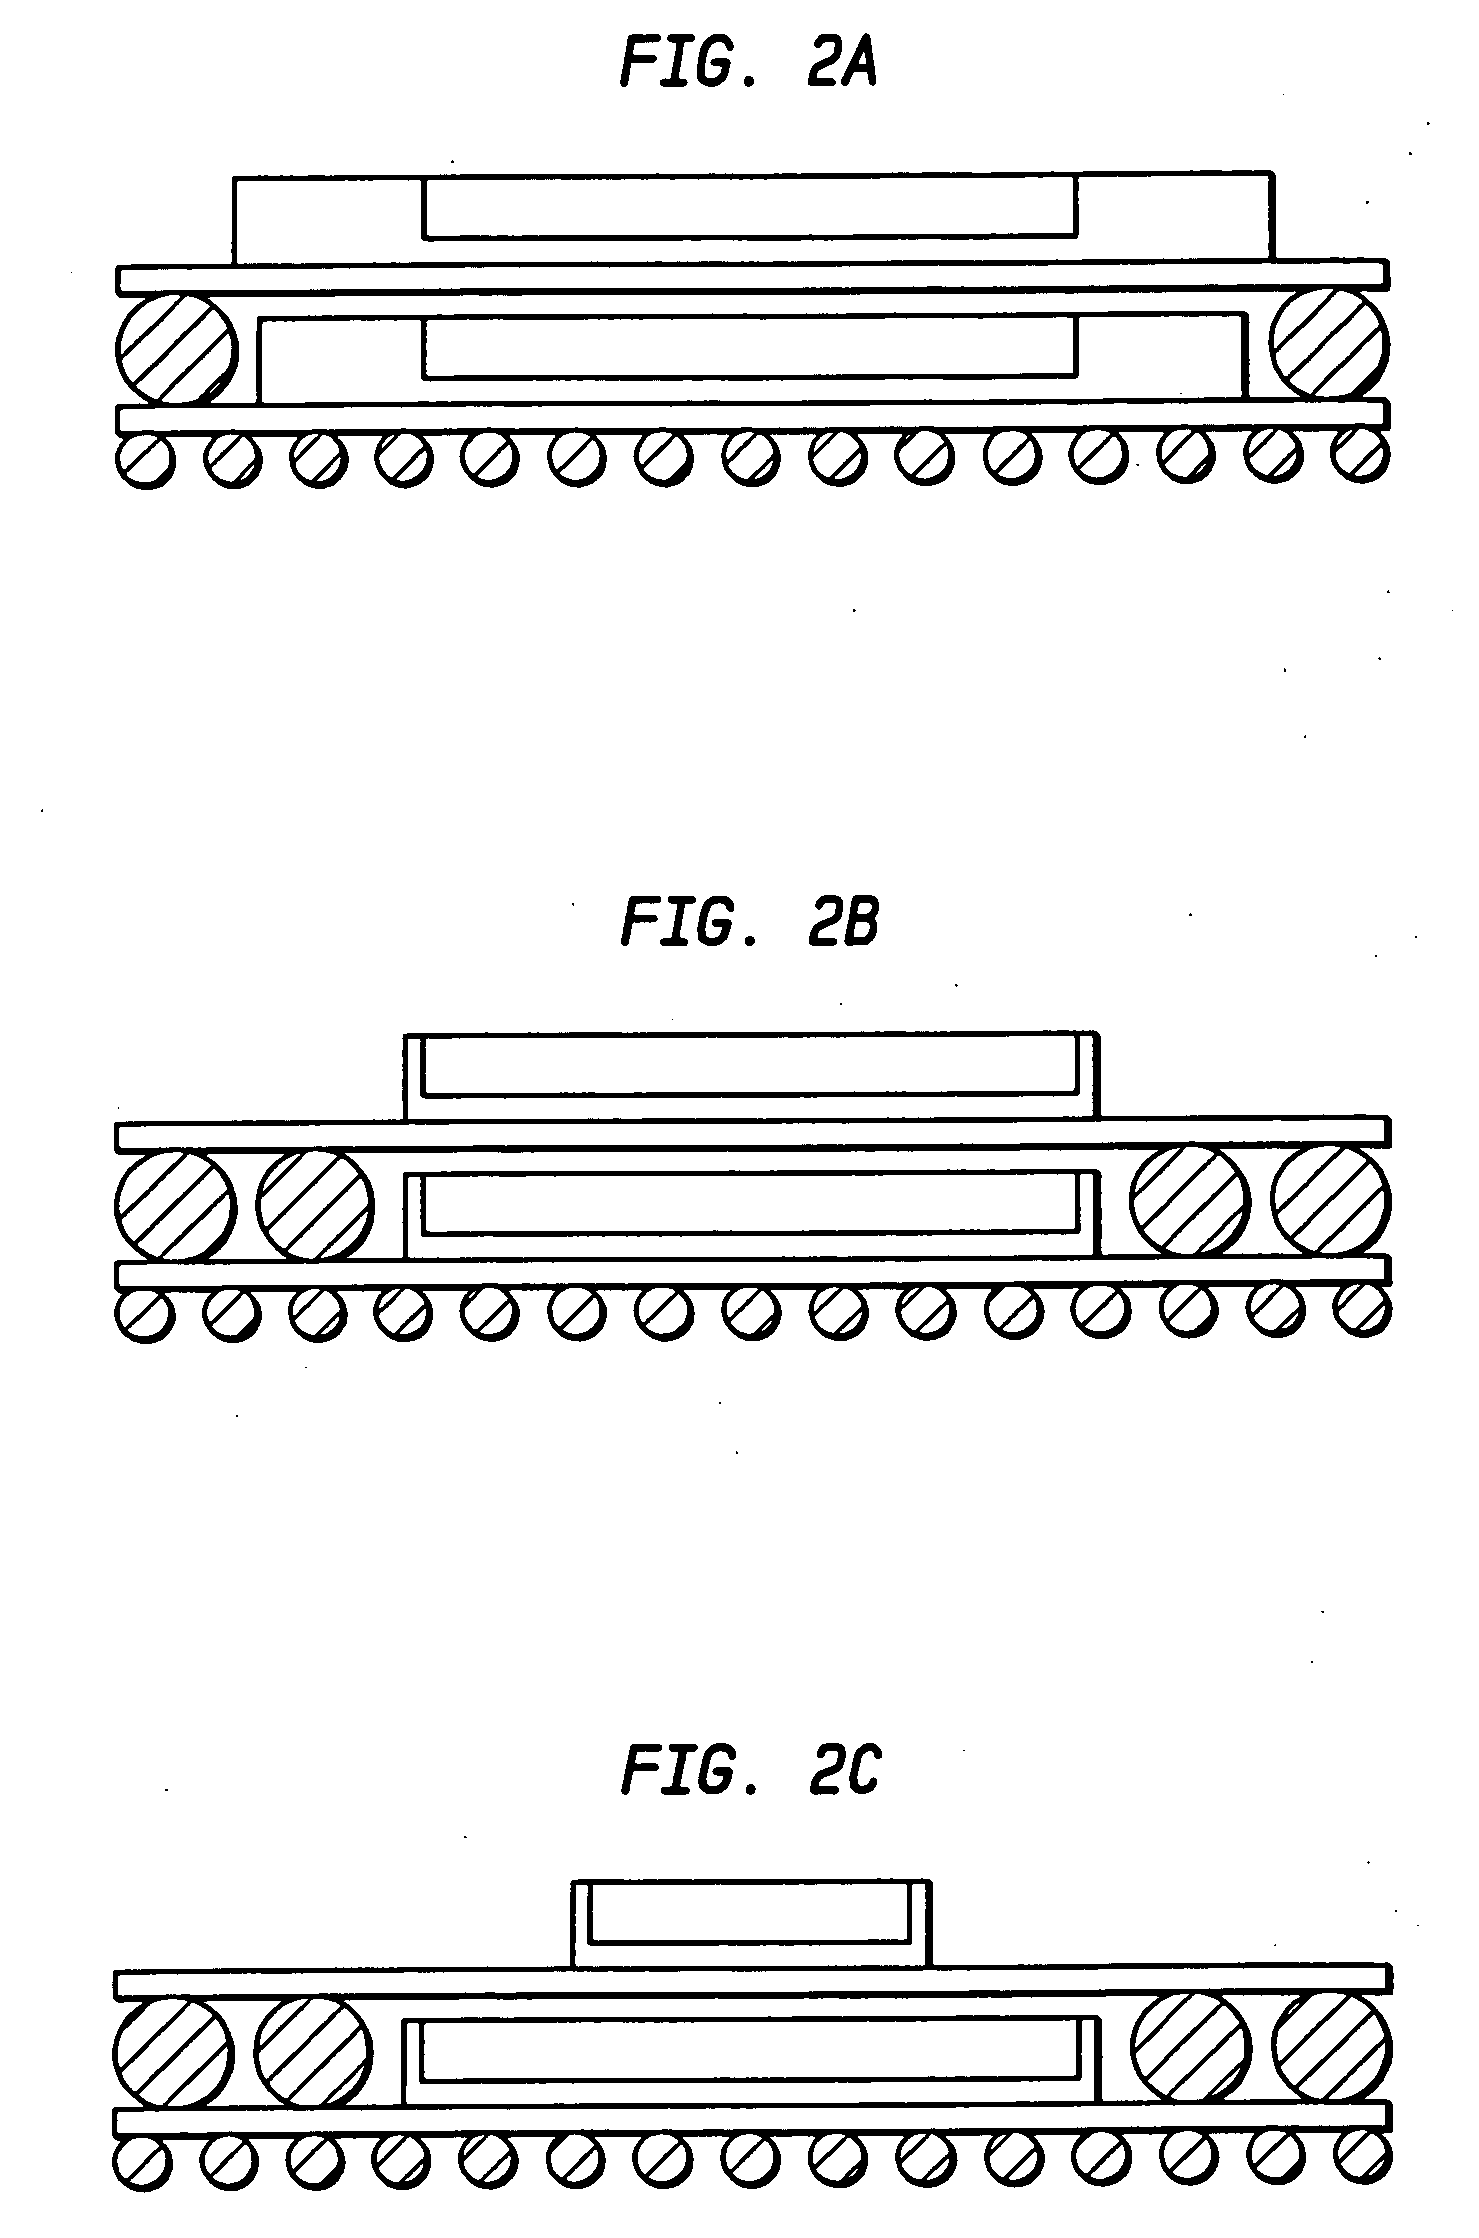 Stacked chip assembly with stiffening layer